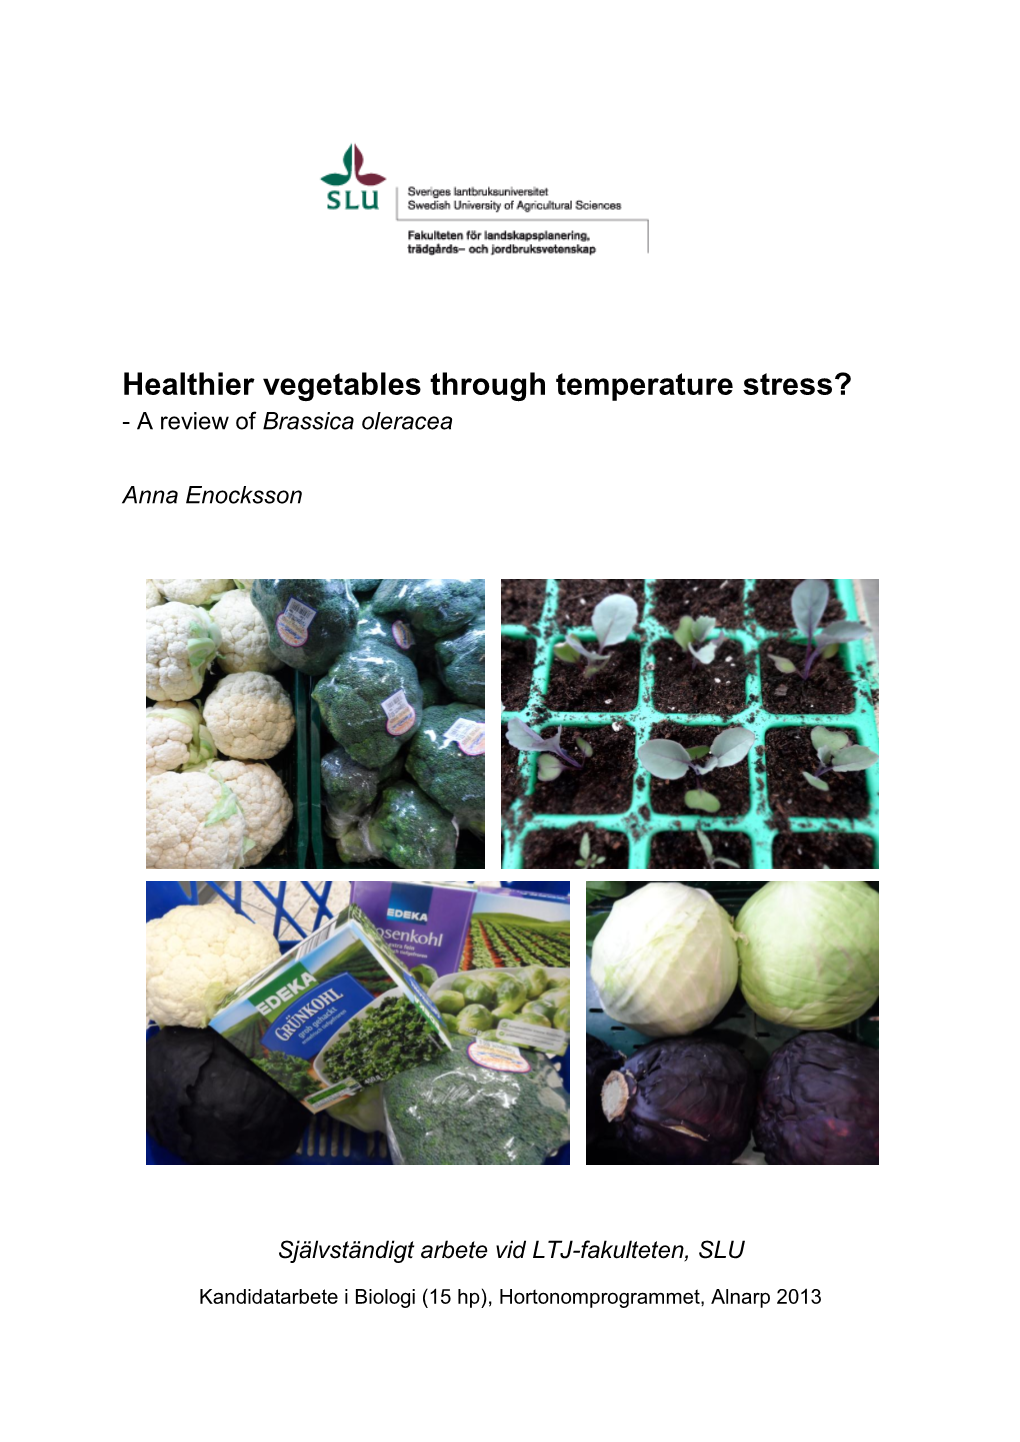 Healthier Vegetables Through Temperature Stress? - a Review of Brassica Oleracea